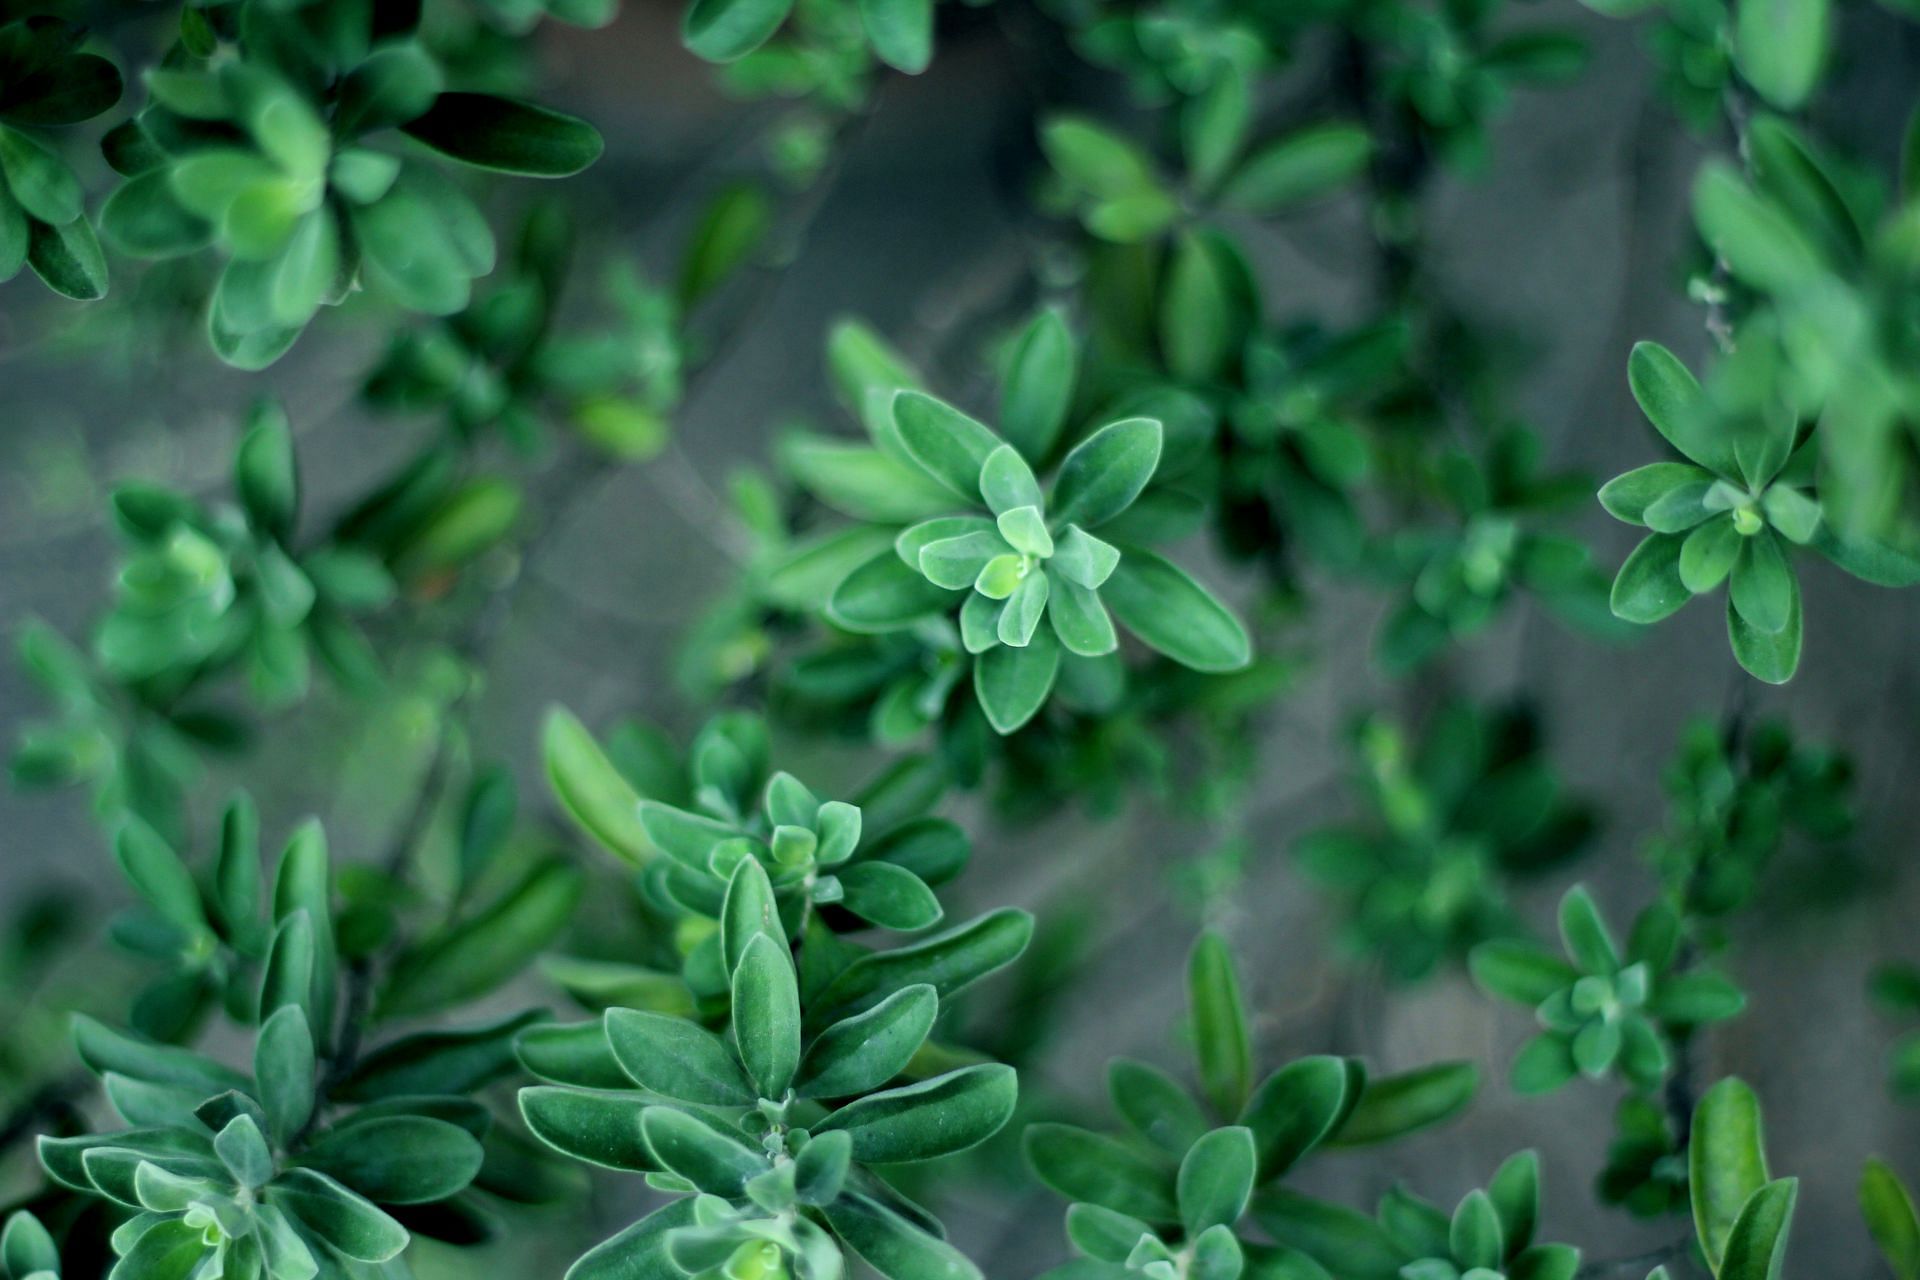 Thyme oil is extracted from these plants. (Image by Albert Melu/Unsplash)